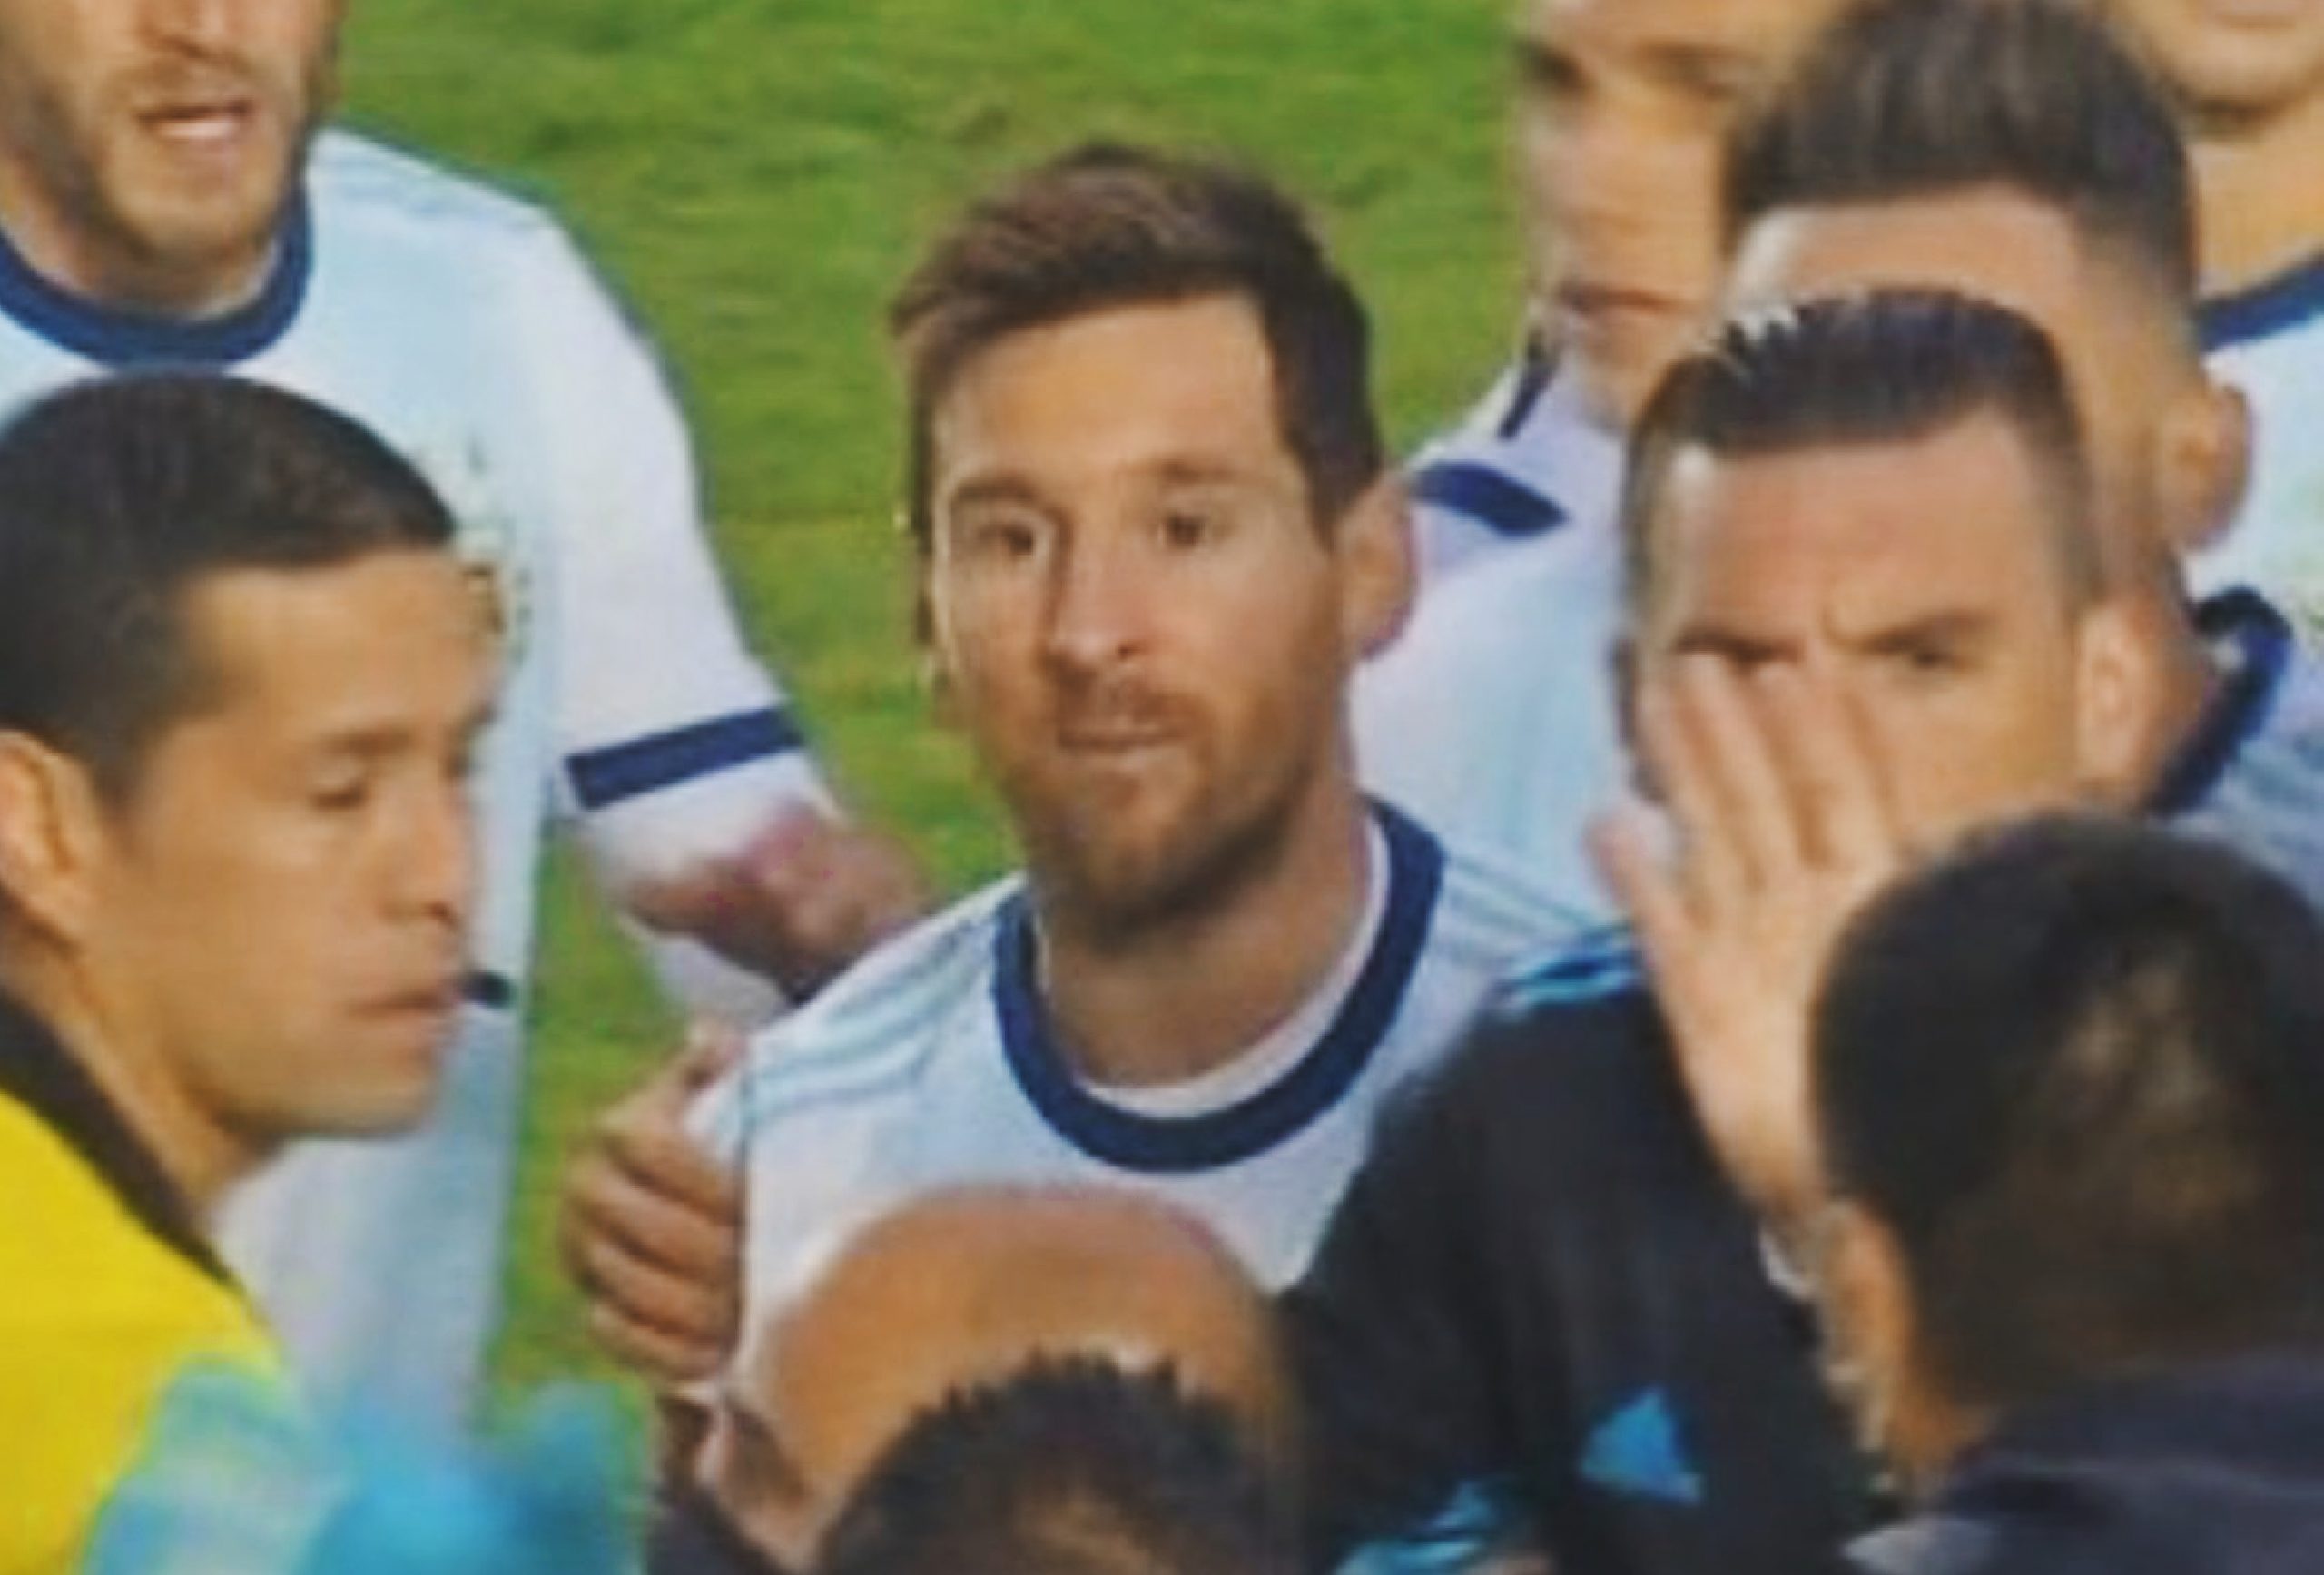 “Go f*ck yourself, what’s wrong with you baldy? – Messi erupts in foul-mouthed rant after Argentina beat Bolivia